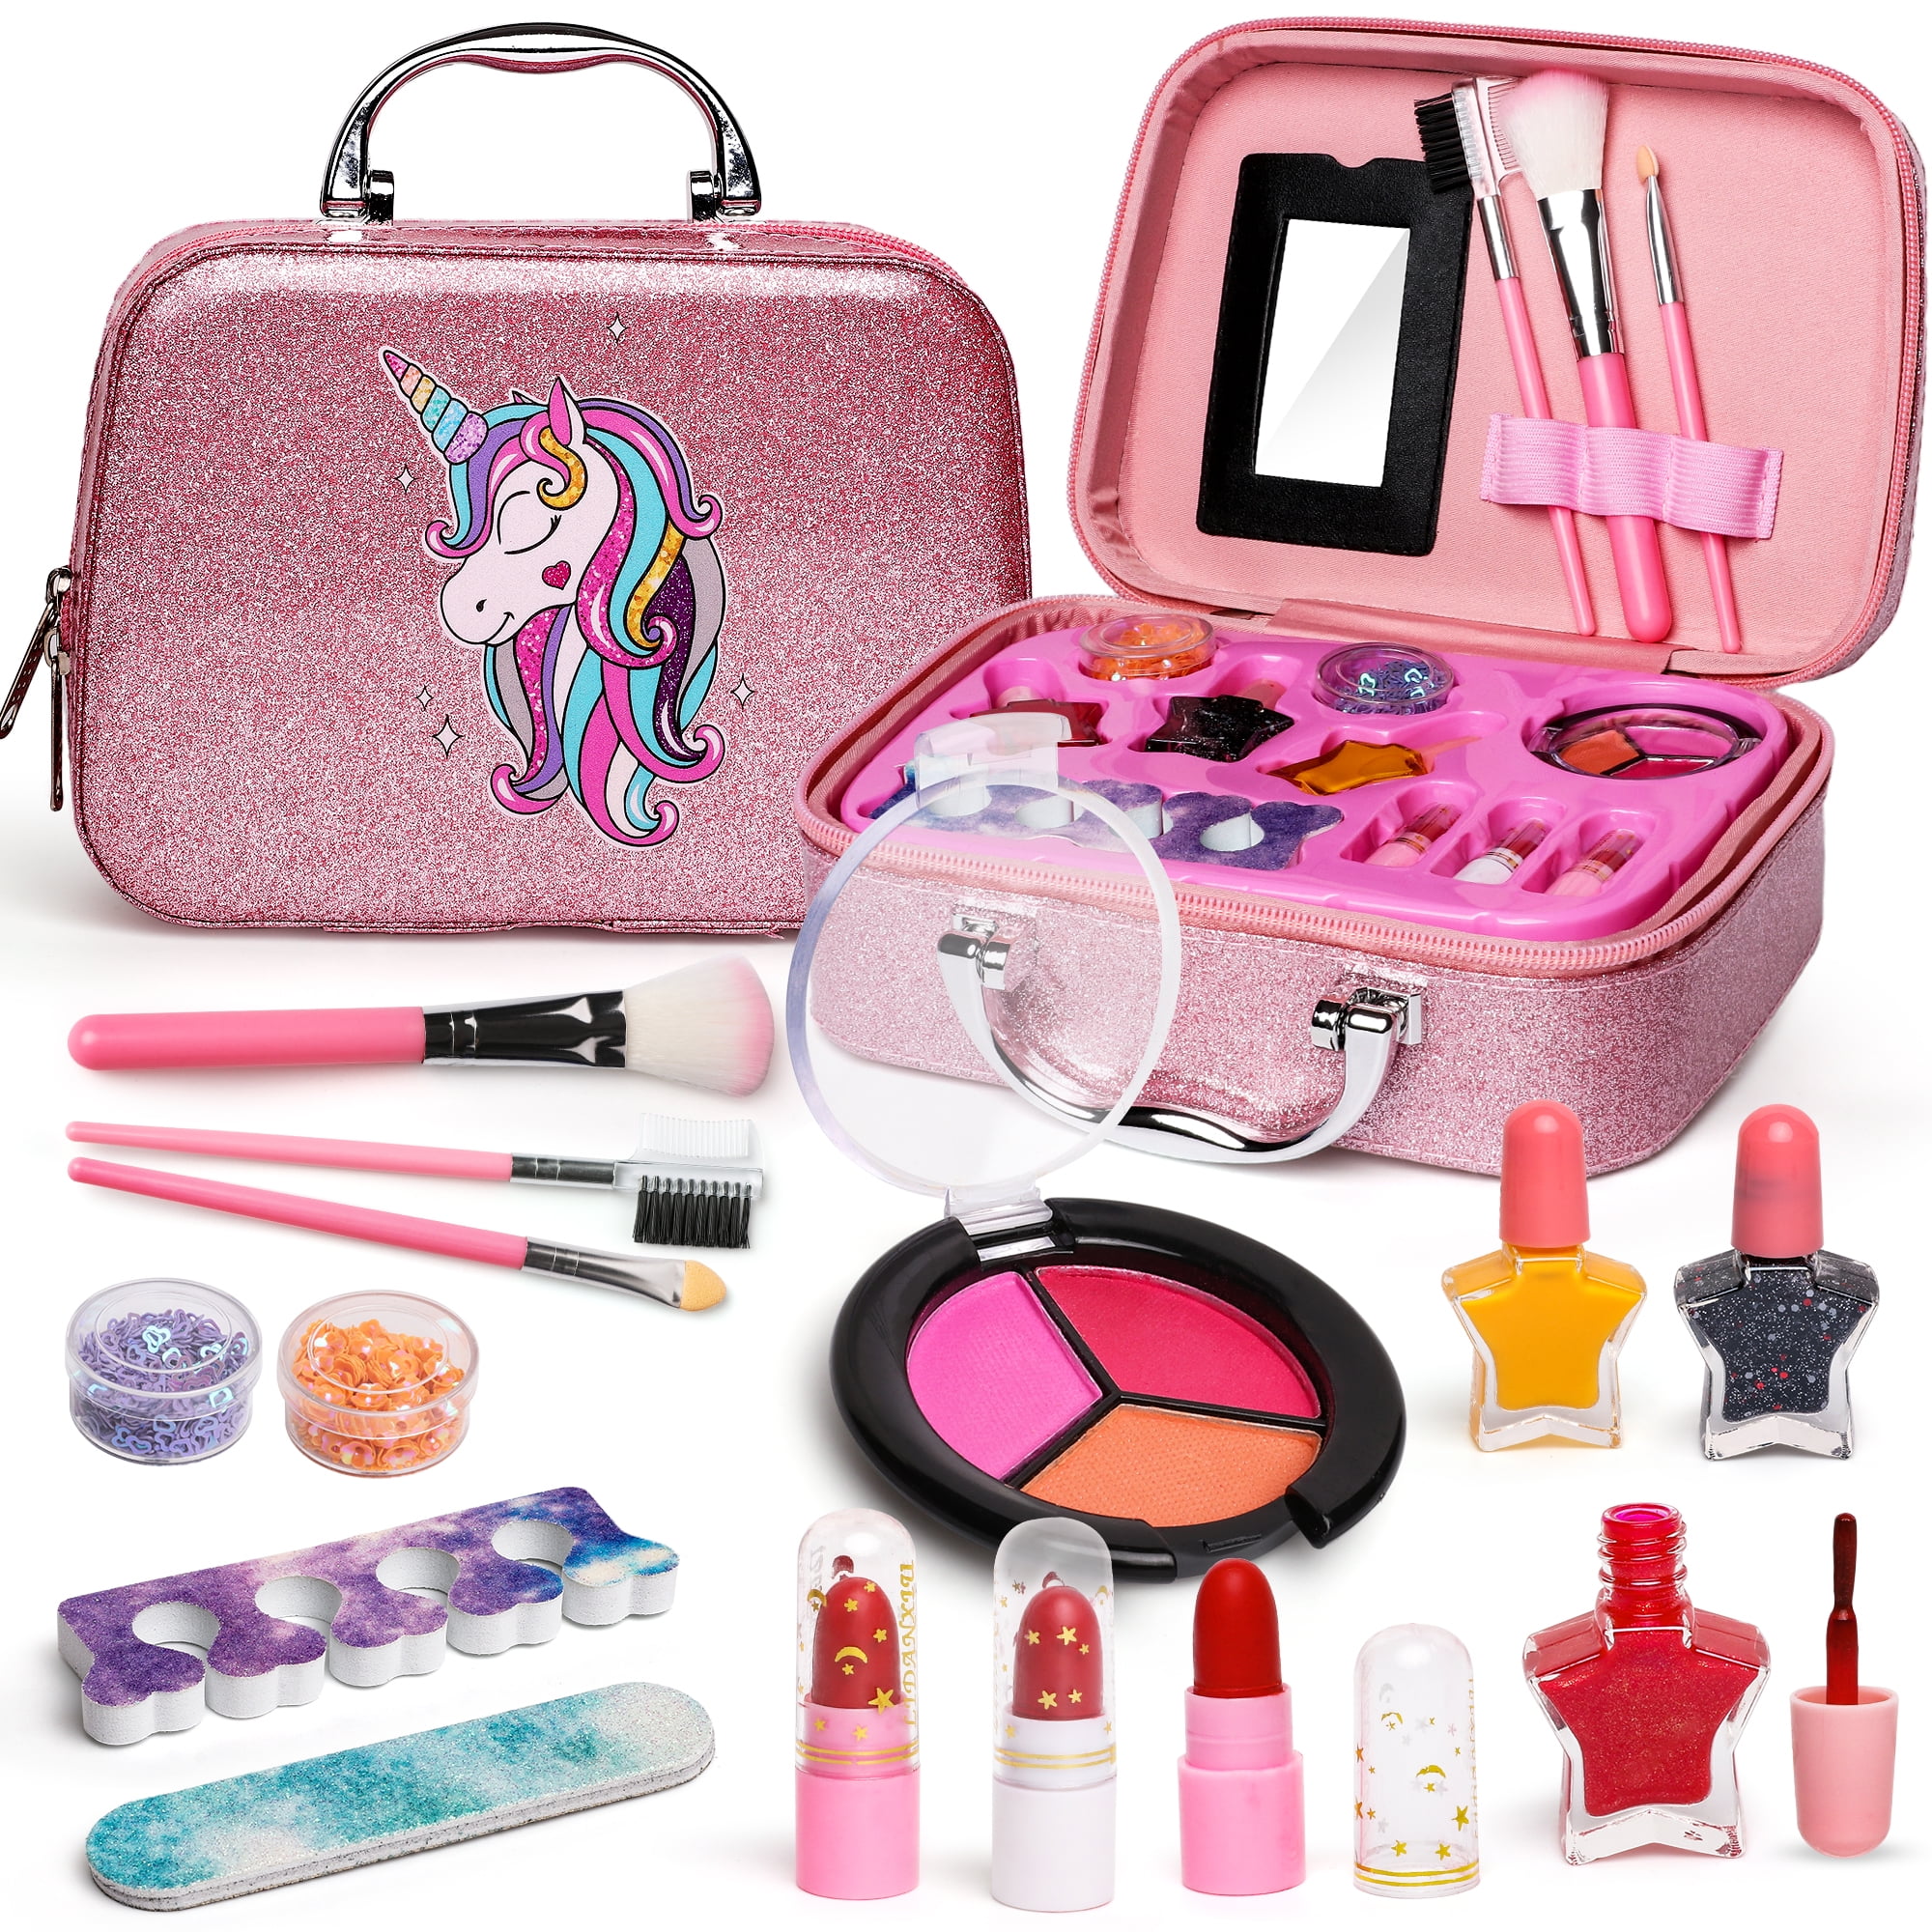 Flybay Kids Makeup Kit for Girls, Washable Makeup Set for Girl, Real Play Makeup Toys